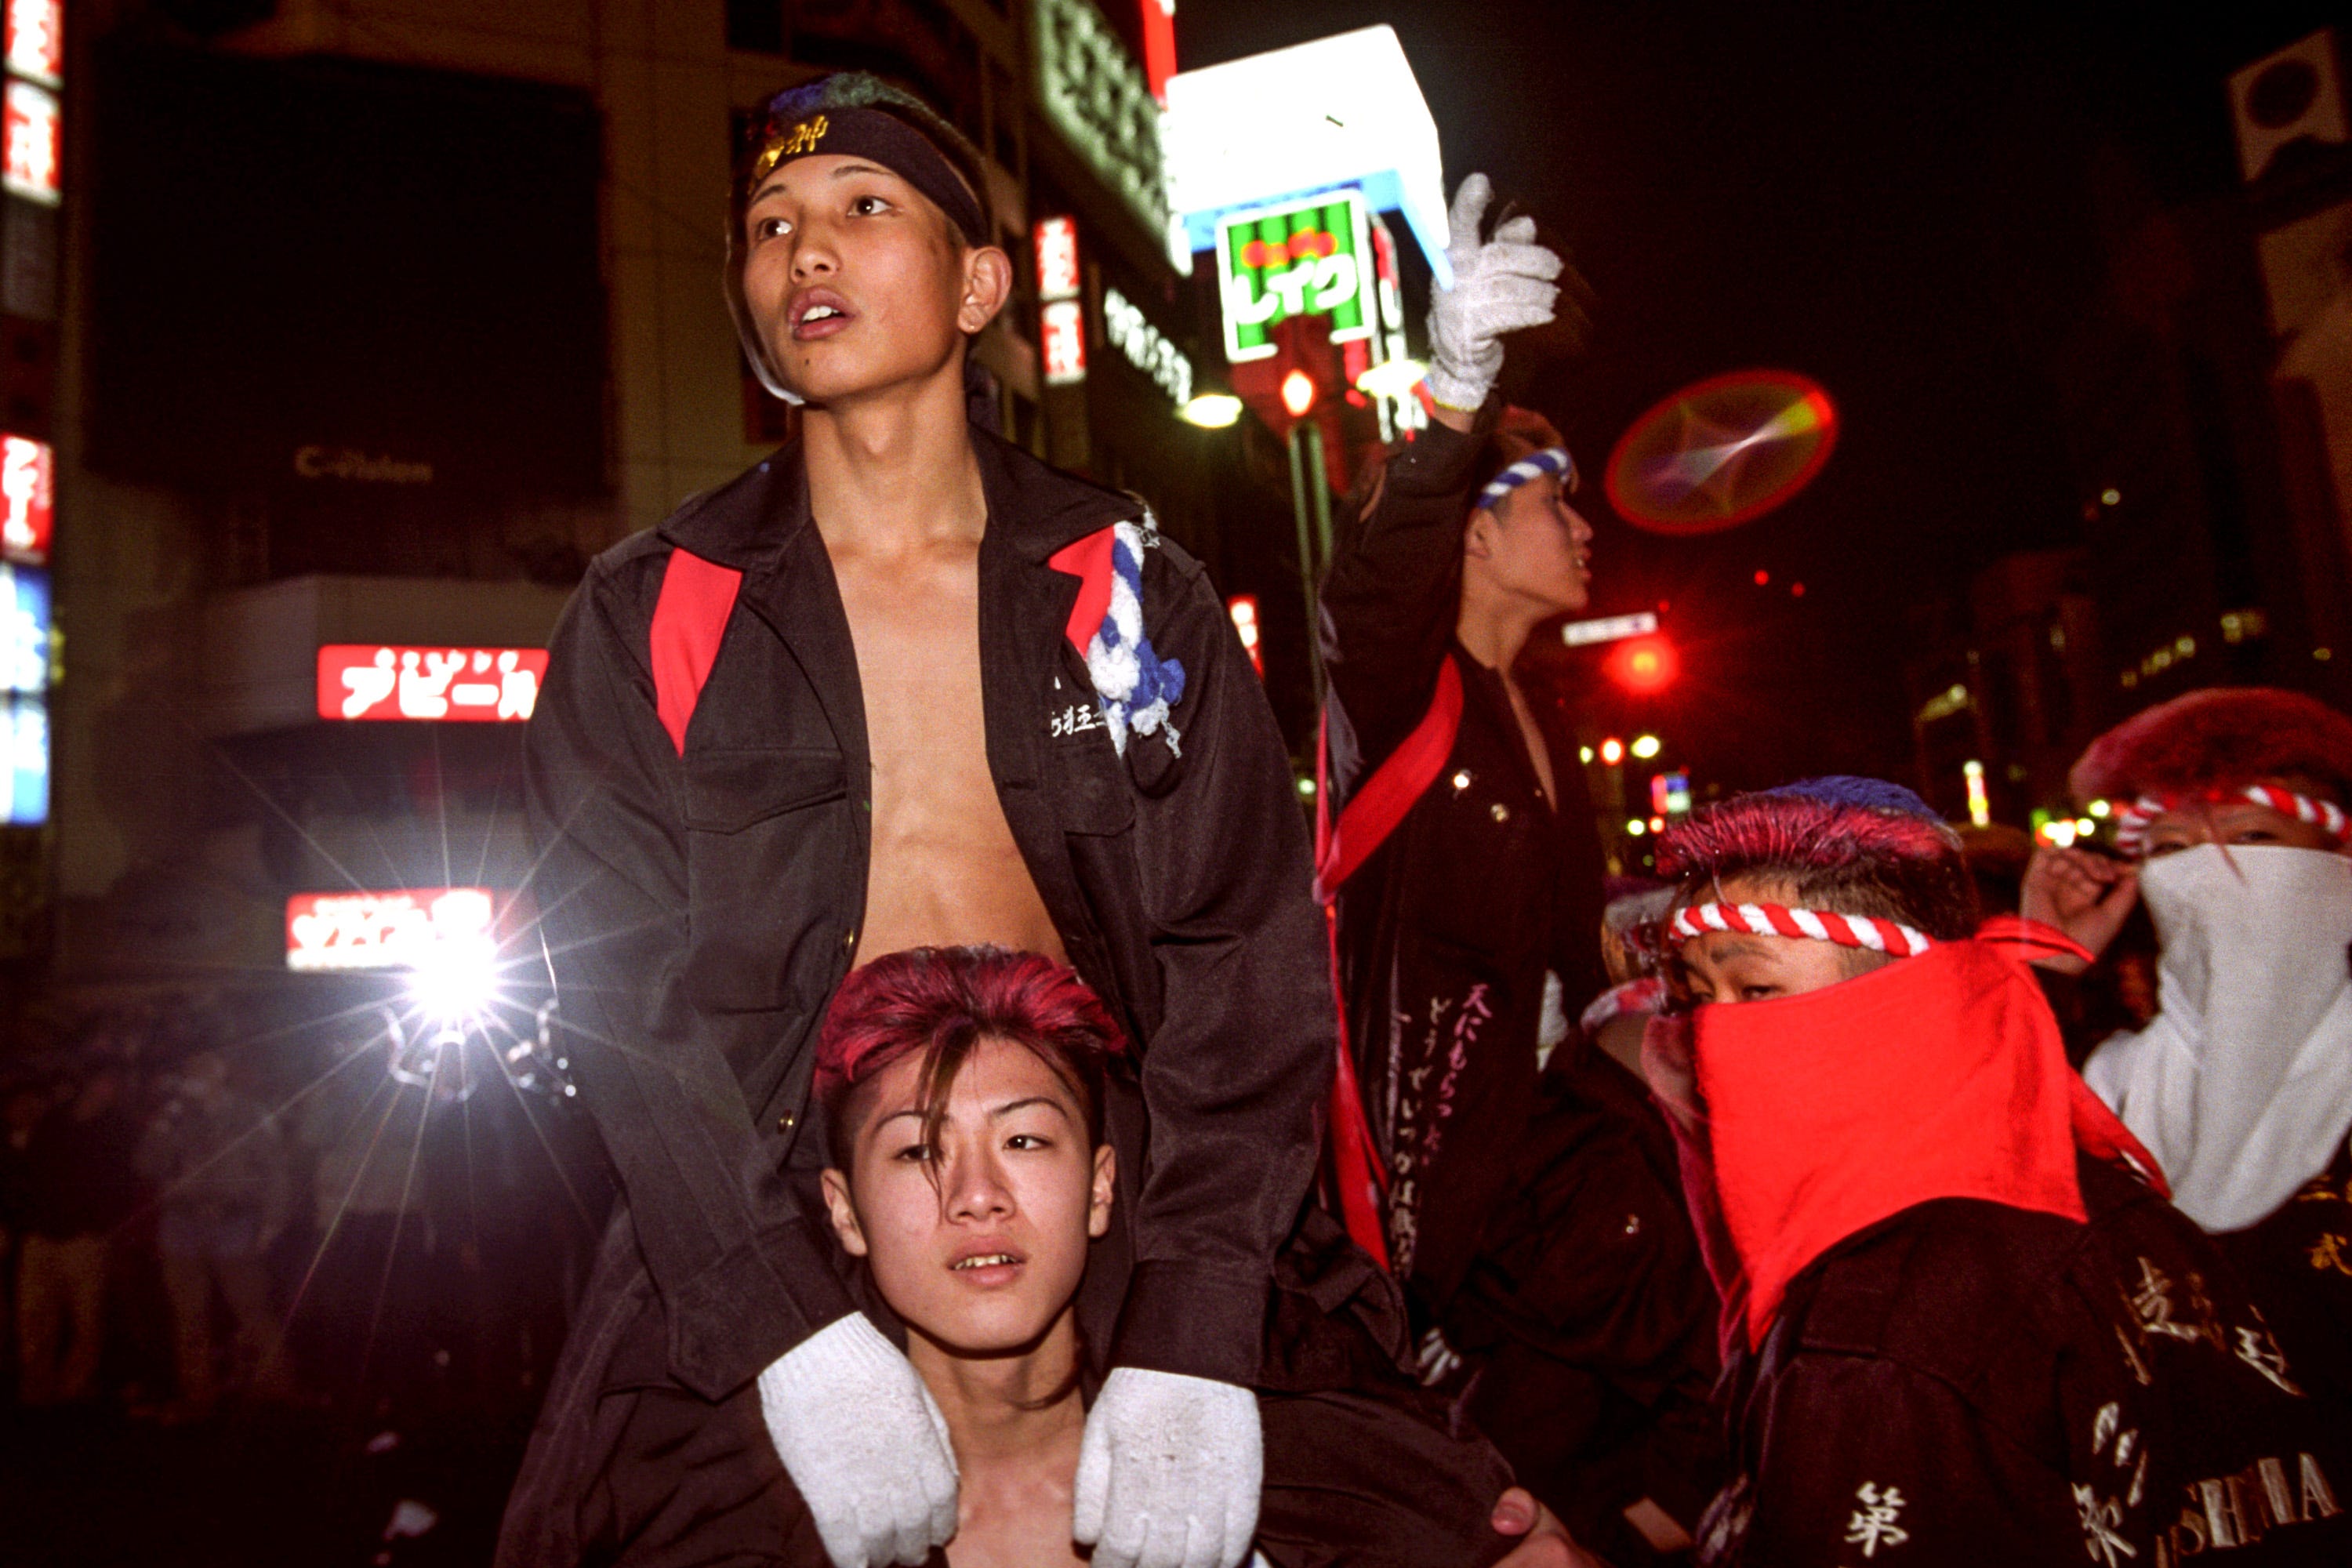 Photos One Japanese Motorcycle Gangs Festive Police Riot